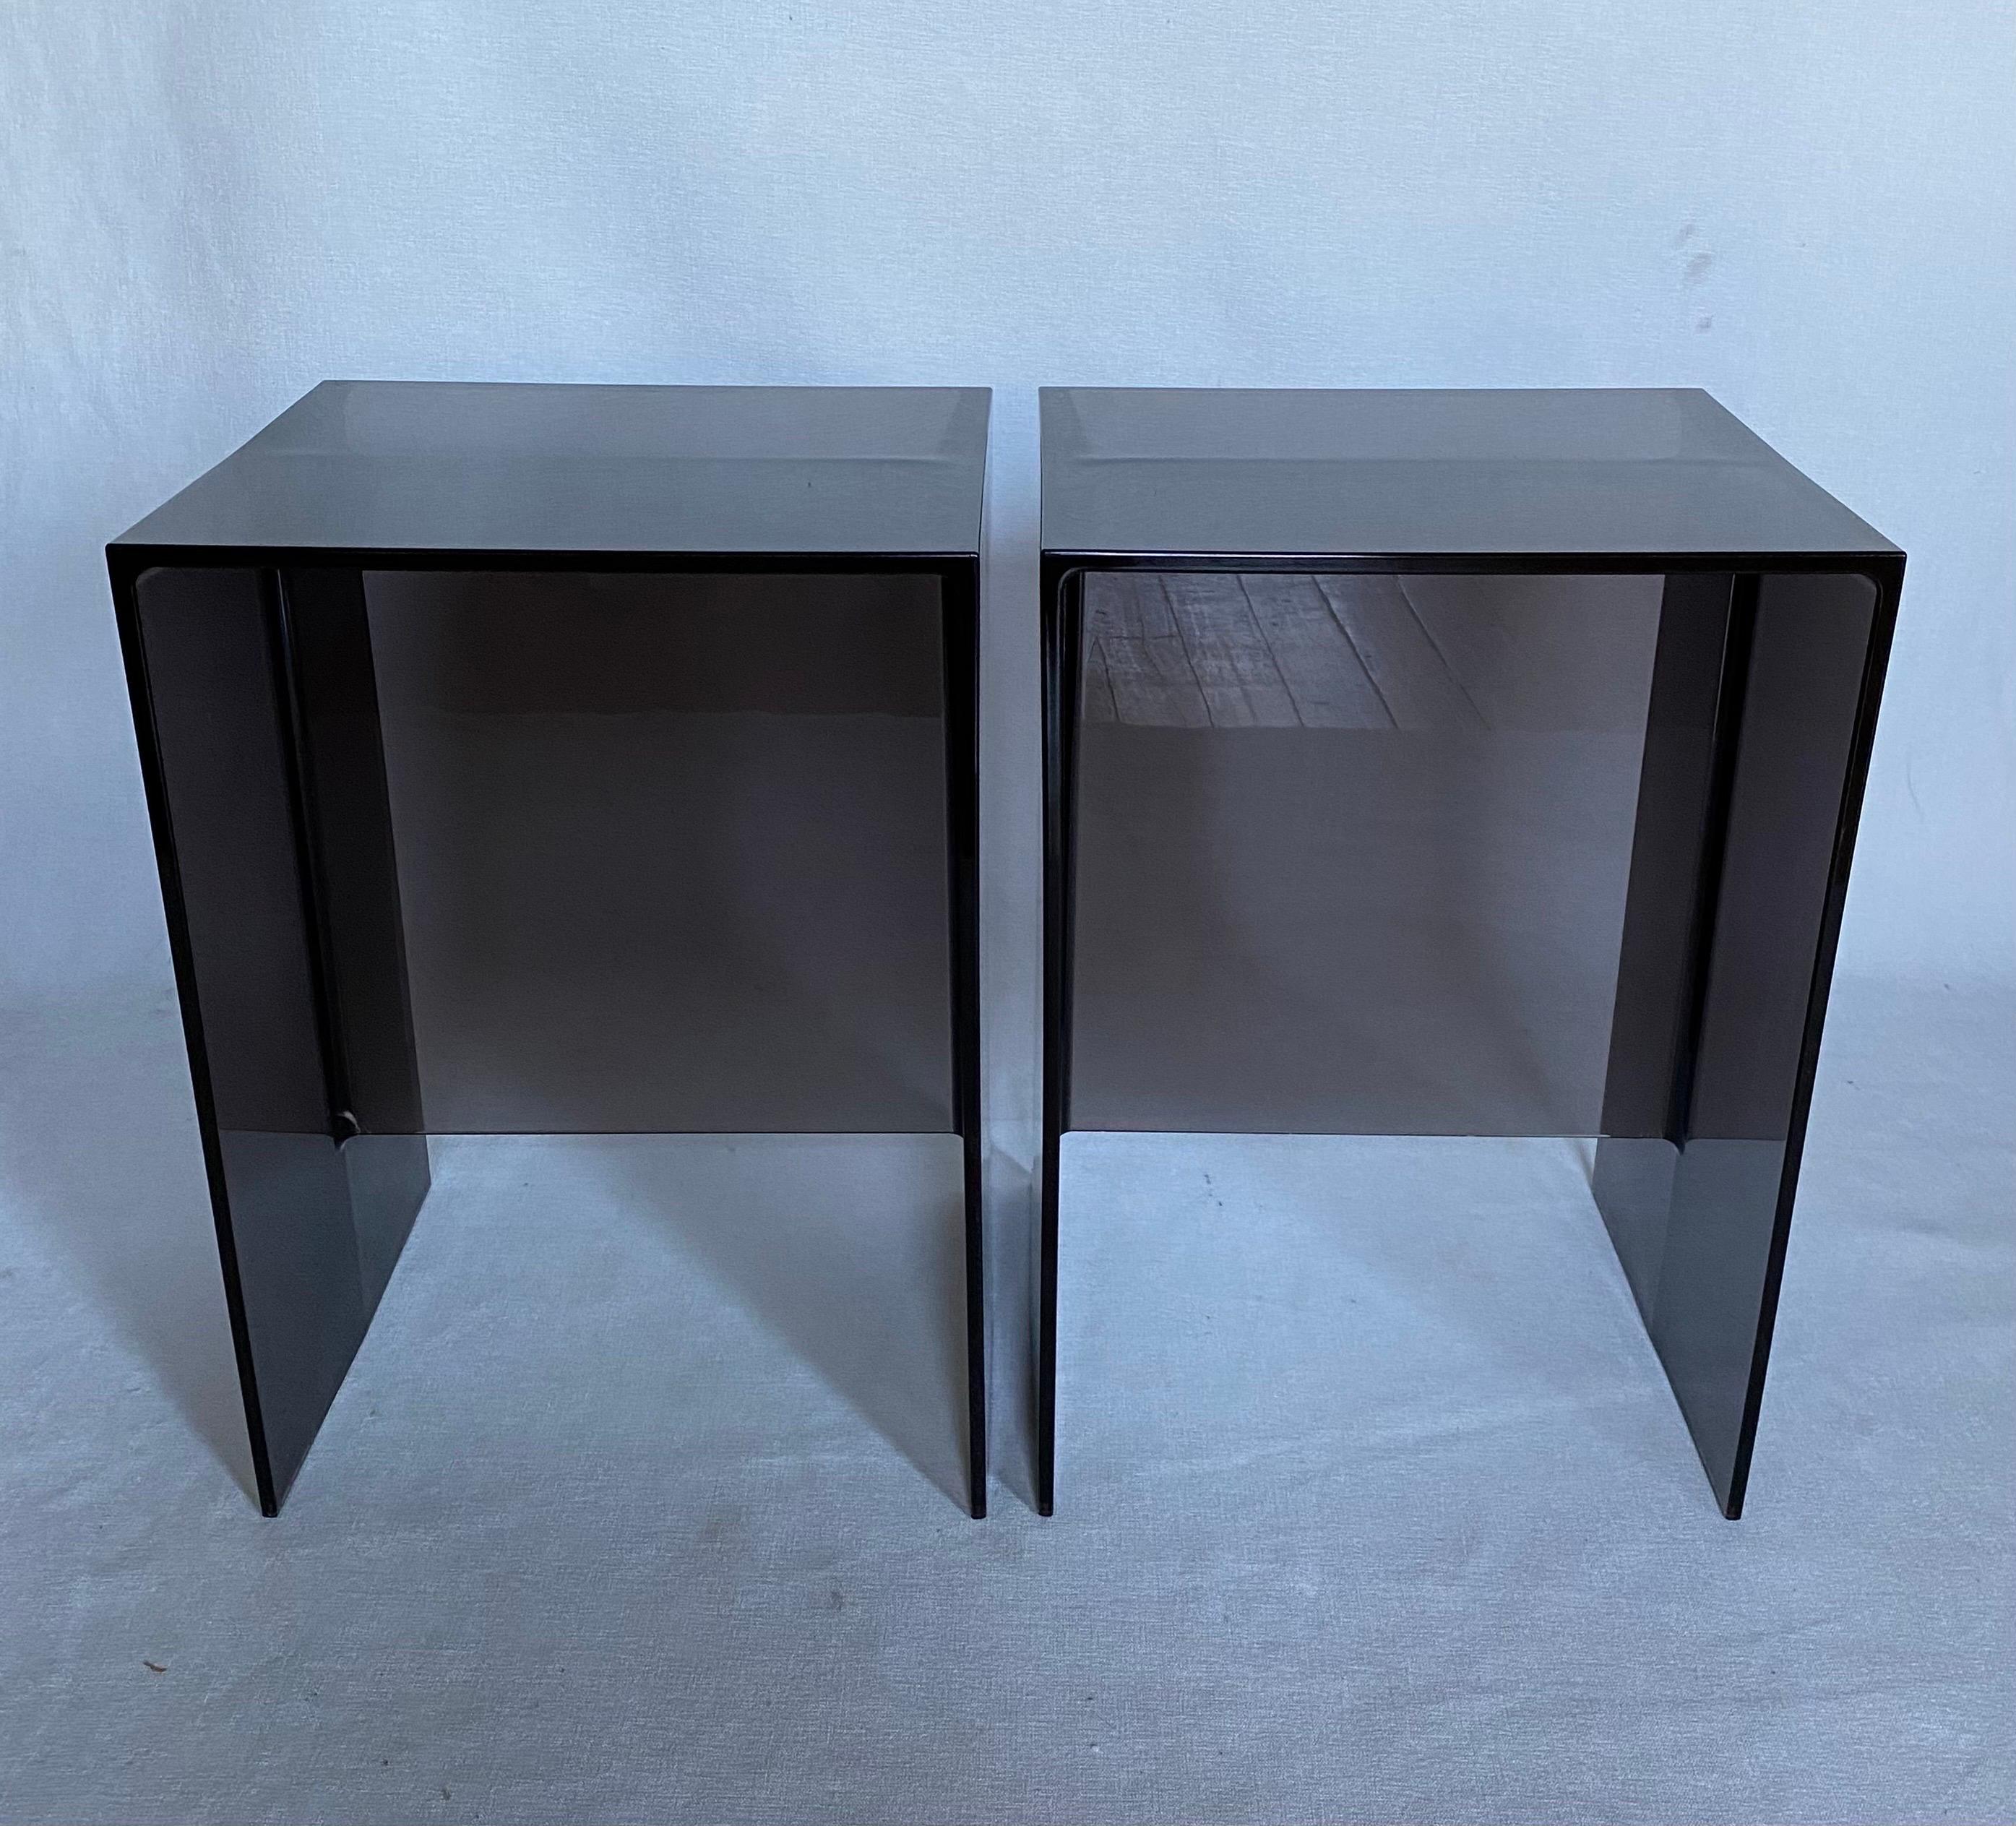 Pair of geometric Max-Beam side tables by Ludovica + Roberto Palomba for Kartell. These modern transparent smoked grey acrylic side accent tables are also strong enough to use as stools for additional seating. Try bunching them together to form a